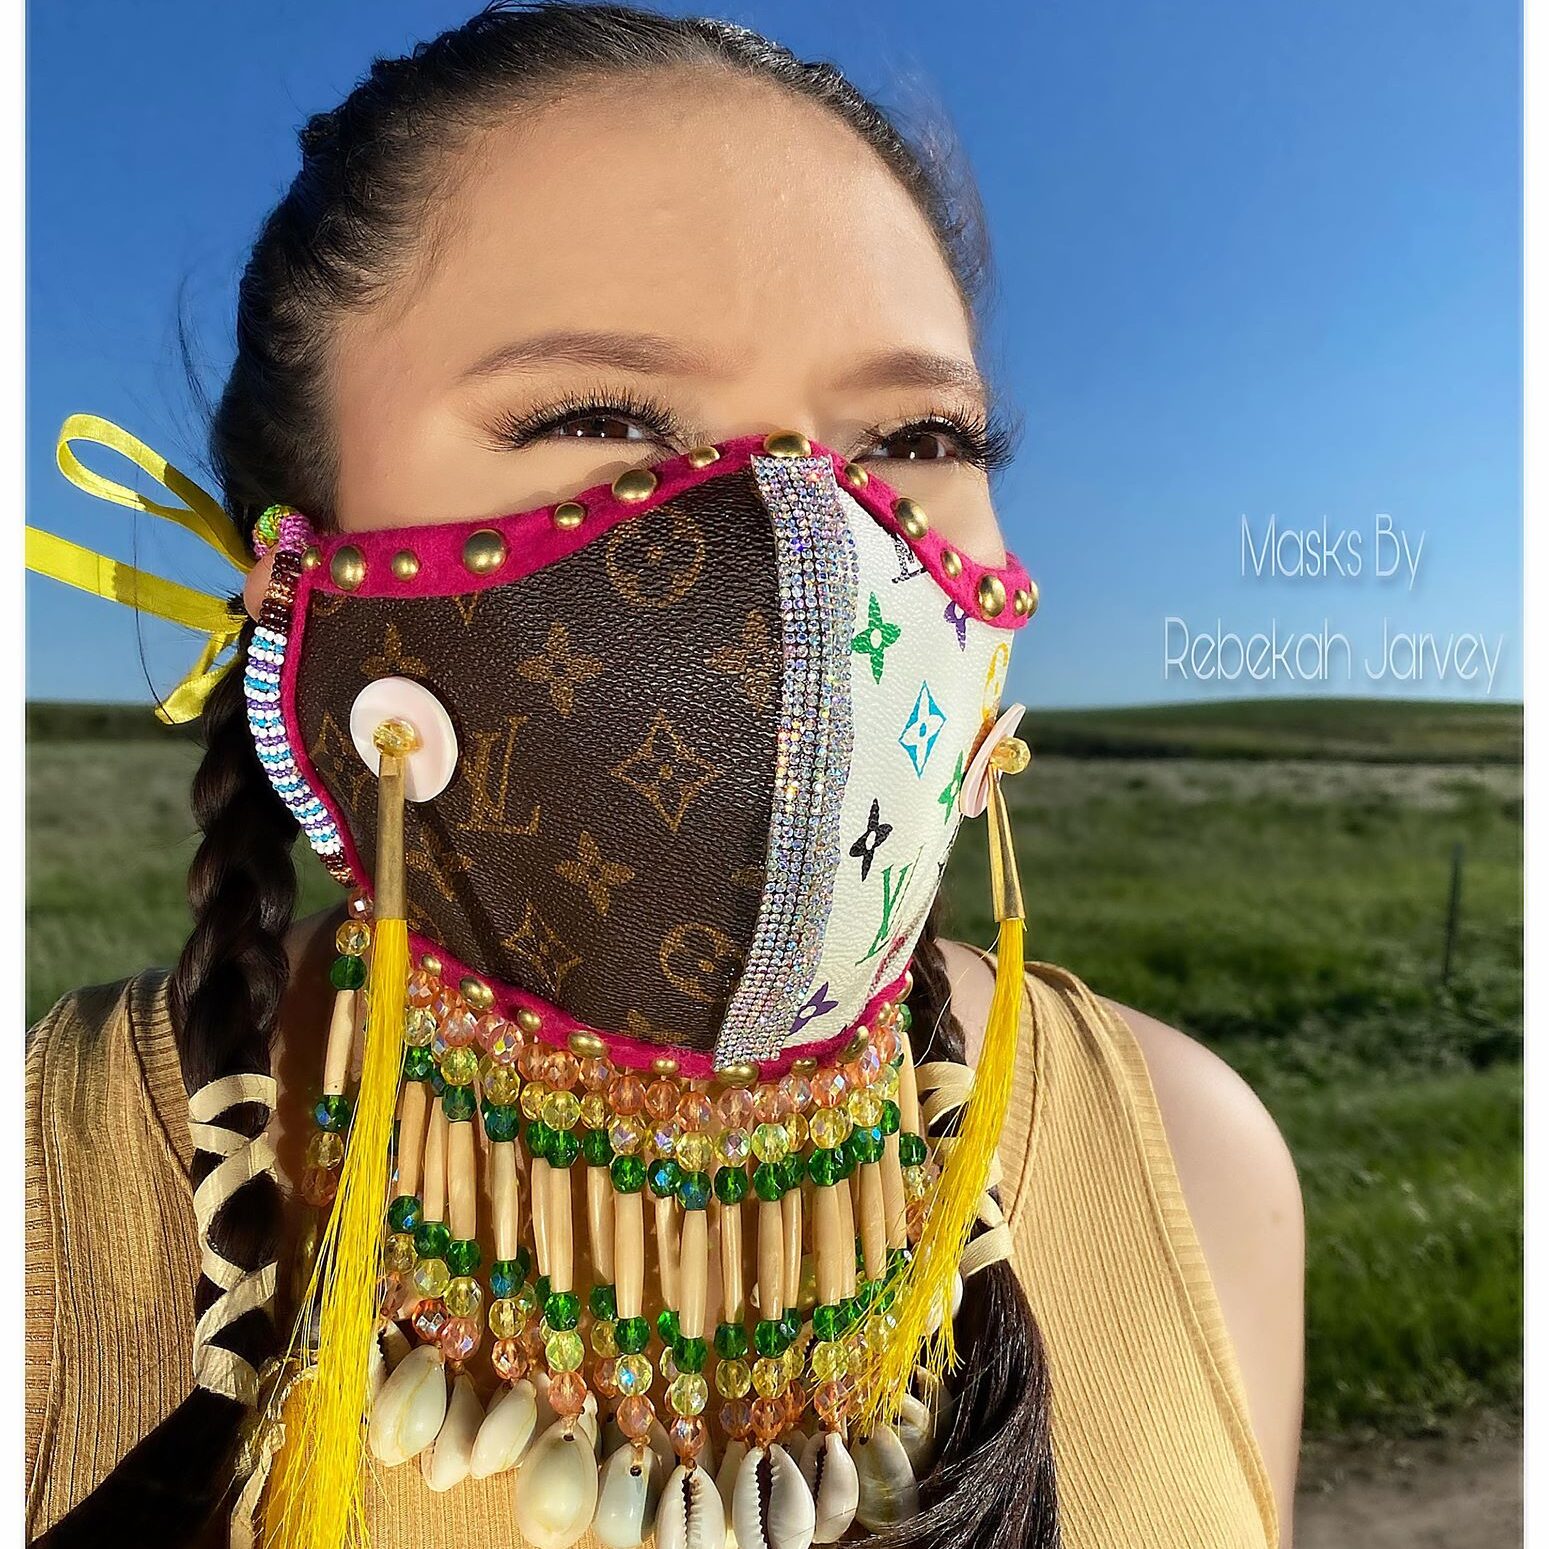 Rebekah Jarvey, multidisciplinary, feathers, regalia, covid-19 masks, workshops, Indigenous Artist, First Nations, Indigenous Arts Collective of Canada, Pass The Feather